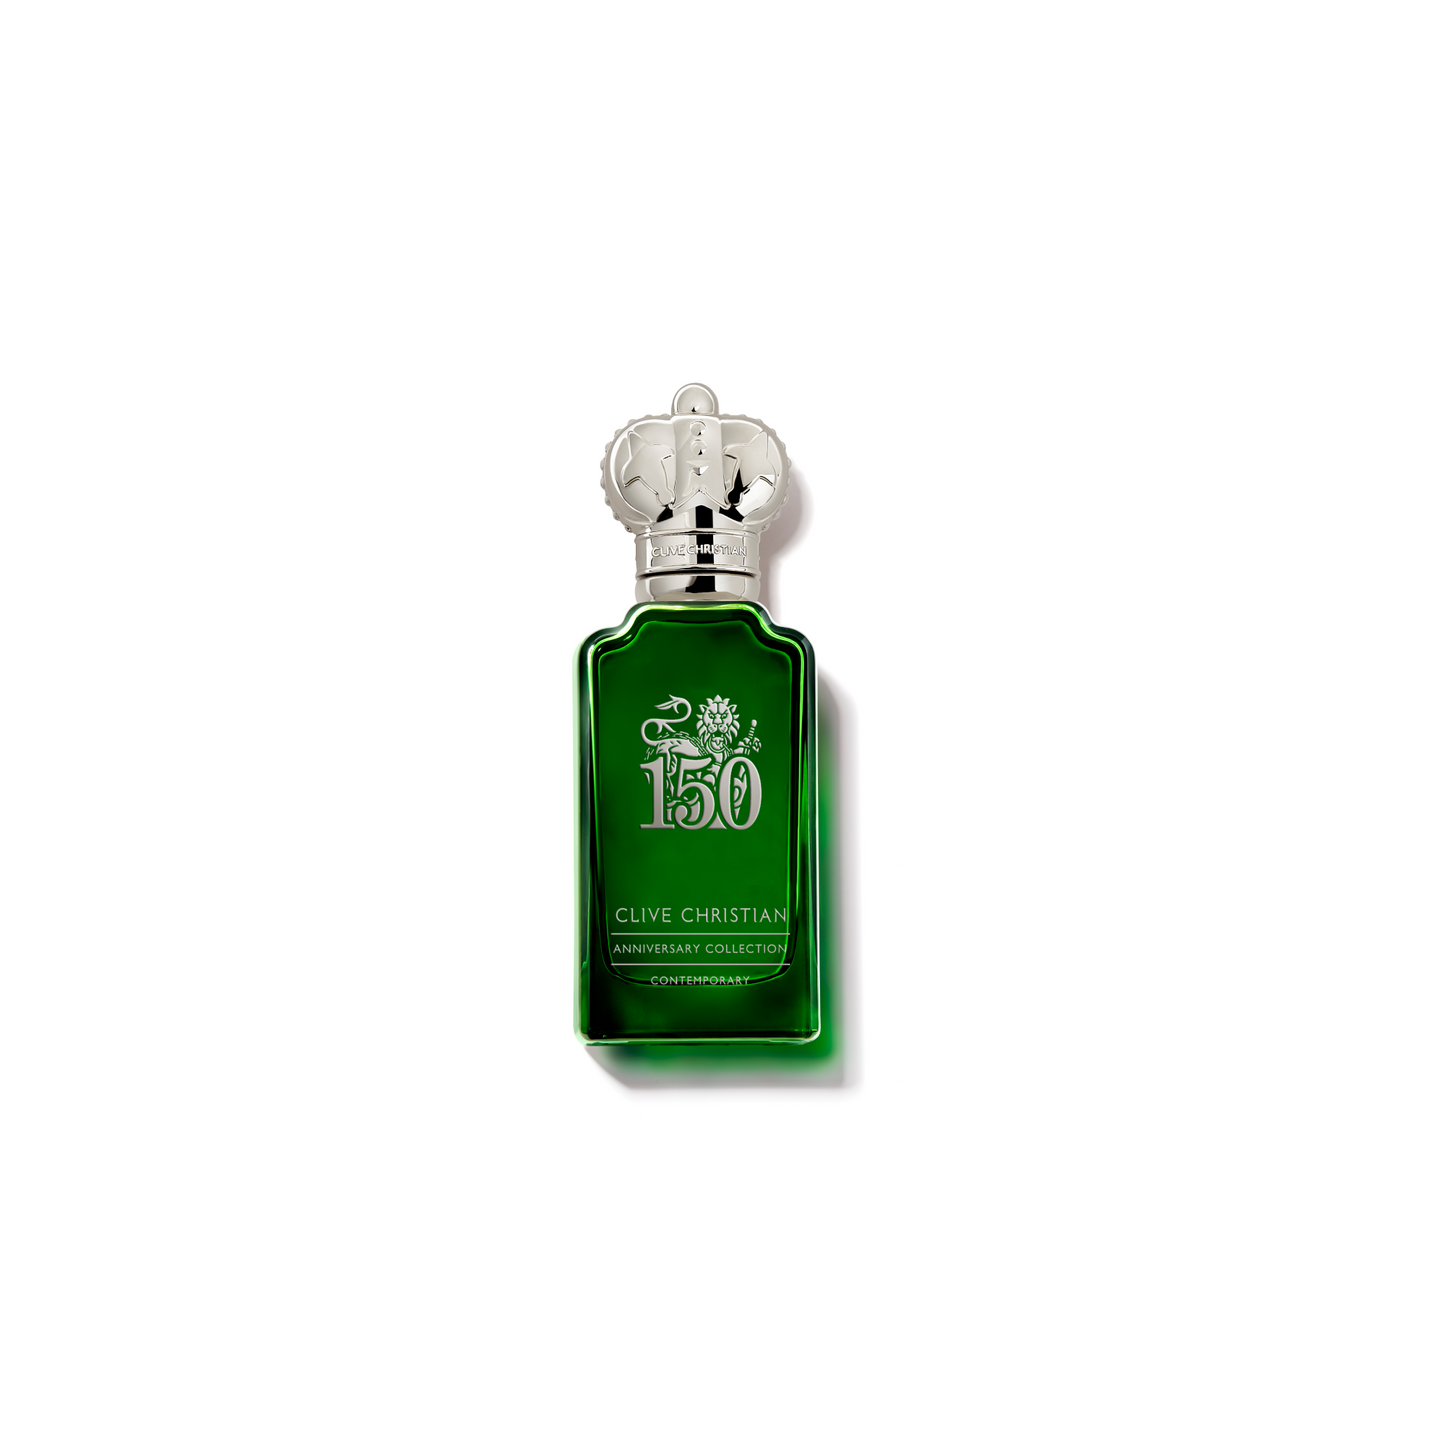 Contemporary 150th Anniversary Collection Perfume